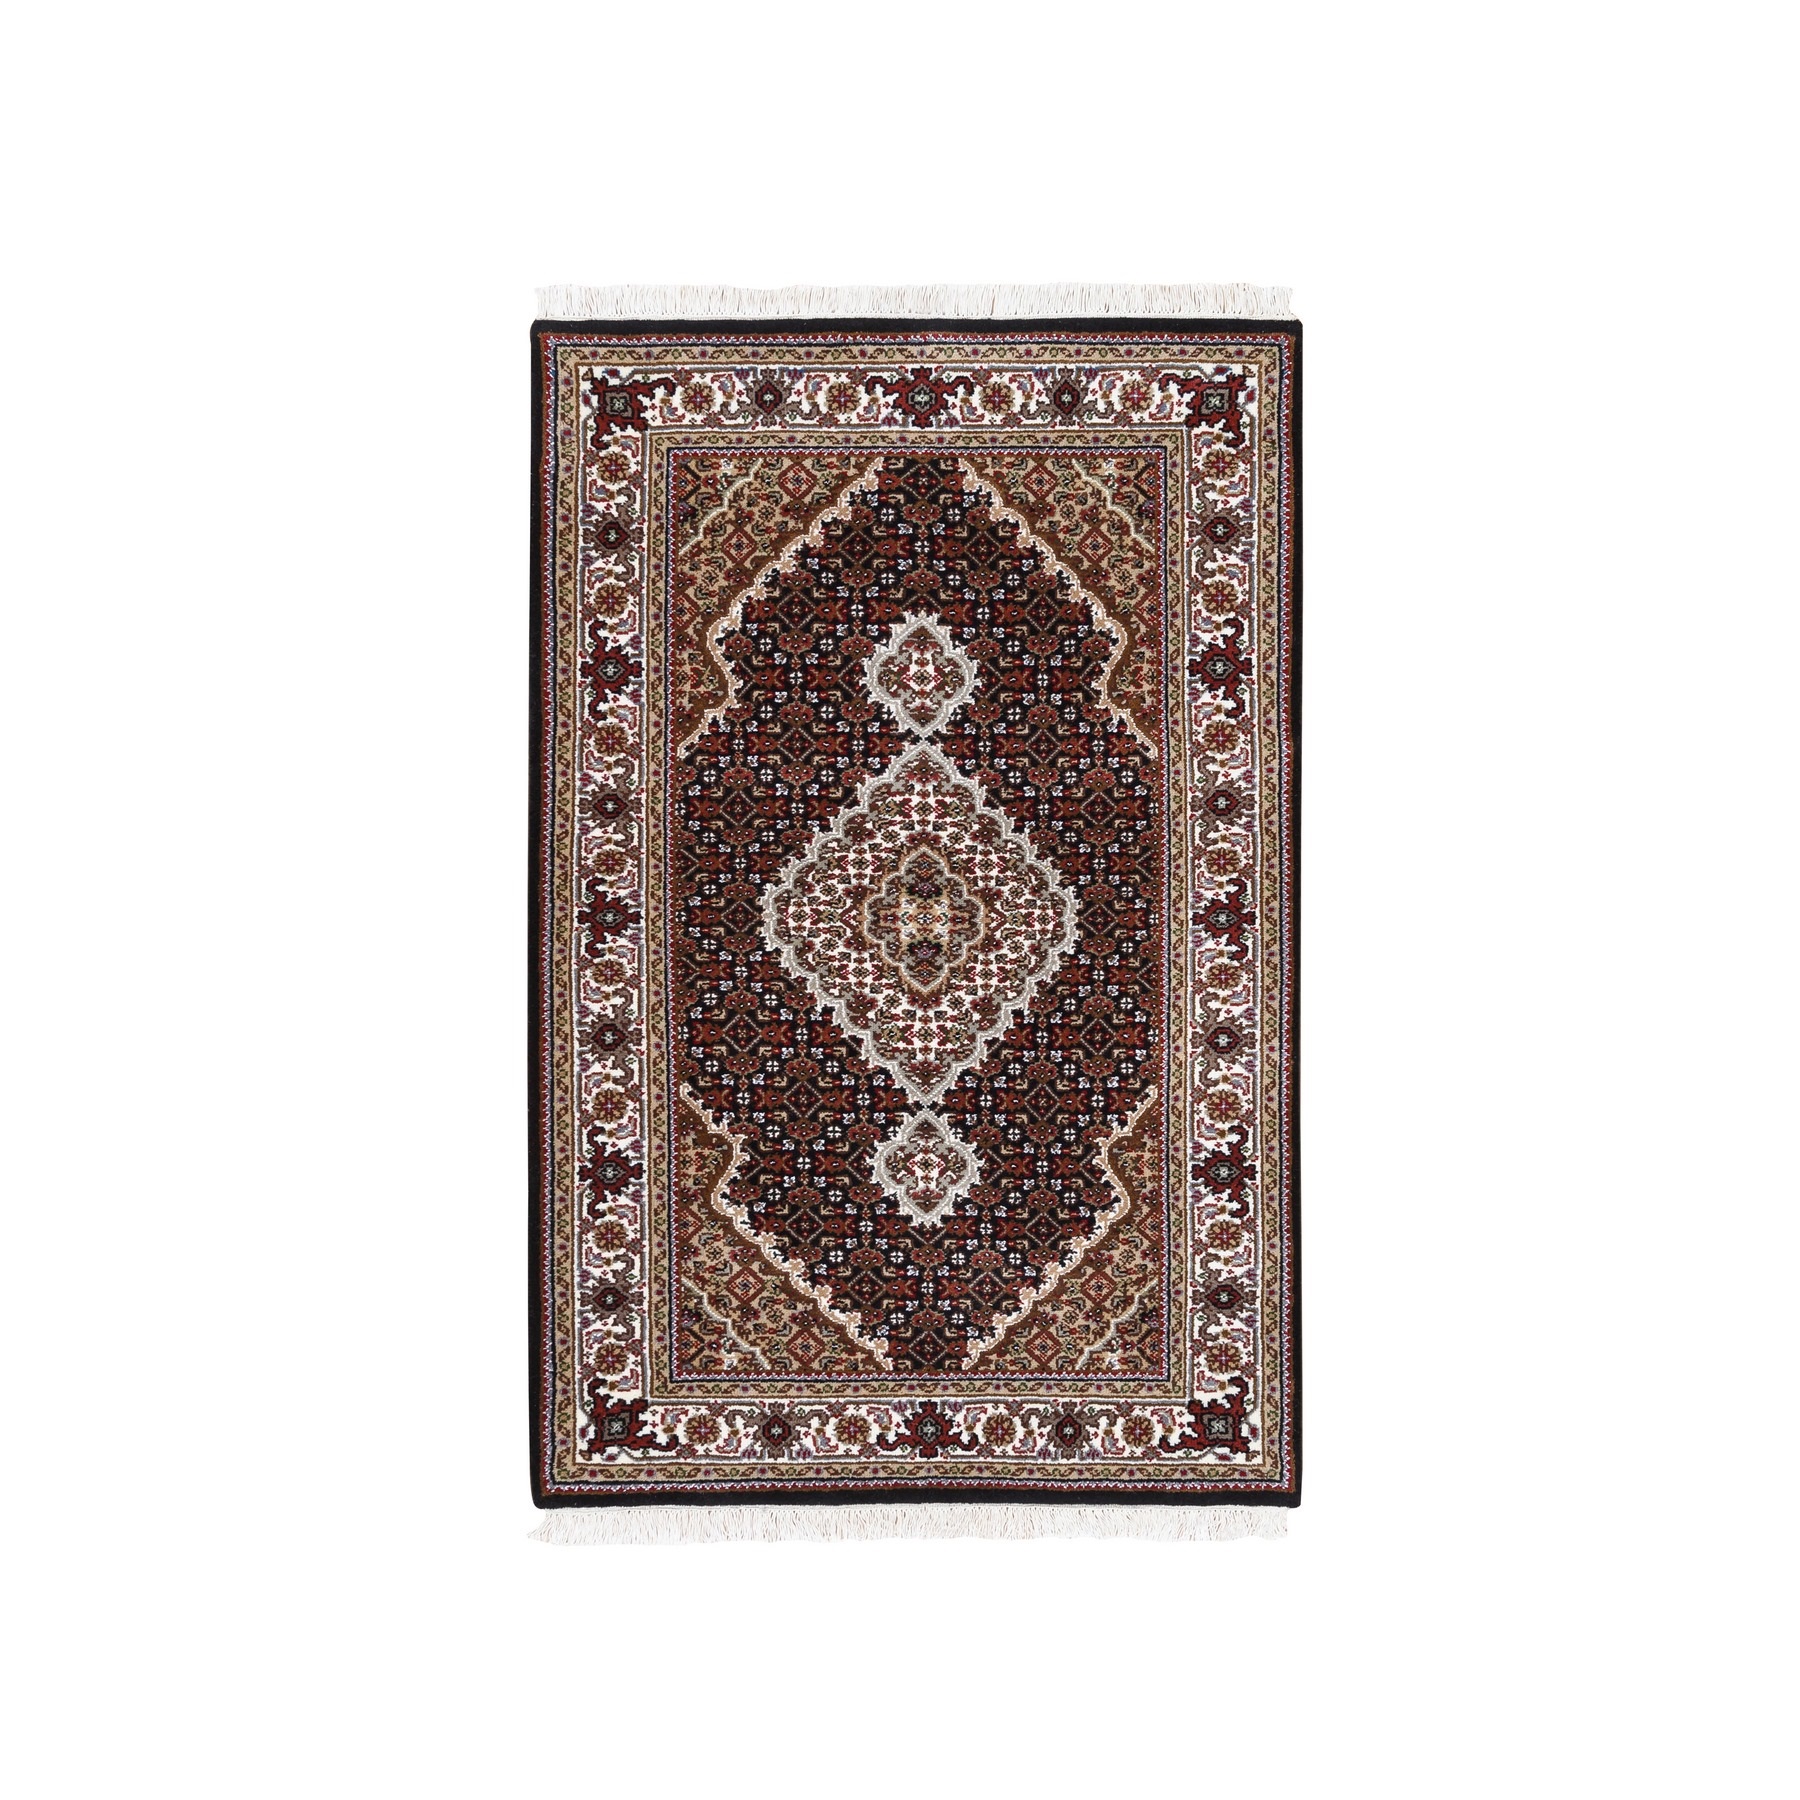 Pirniakan Collection Hand Knotted Black Rug No: 1124984